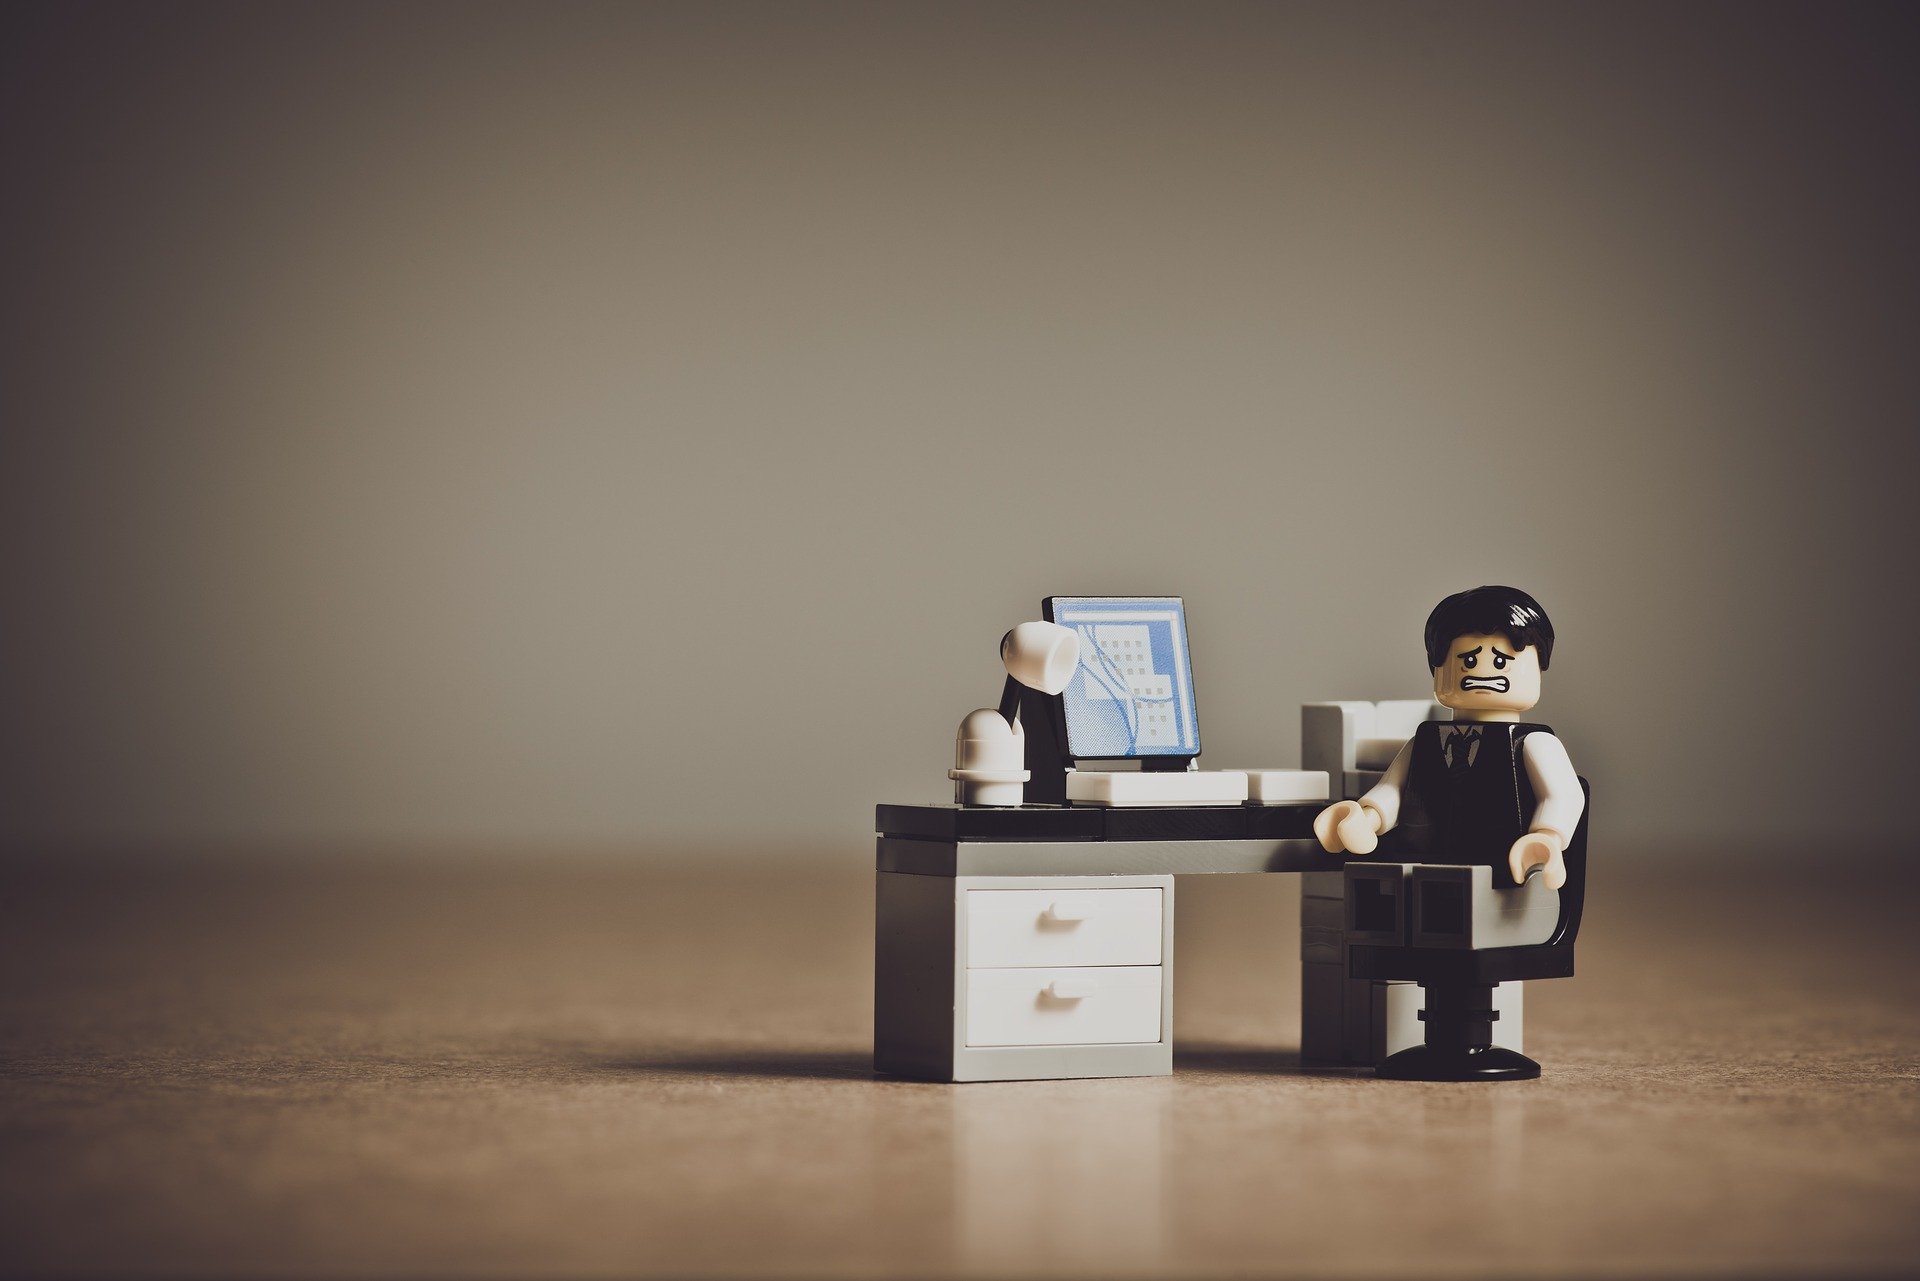 Small loans can turn your life around. A Lego business man sits at a tiny desk with a lamp and laptop.